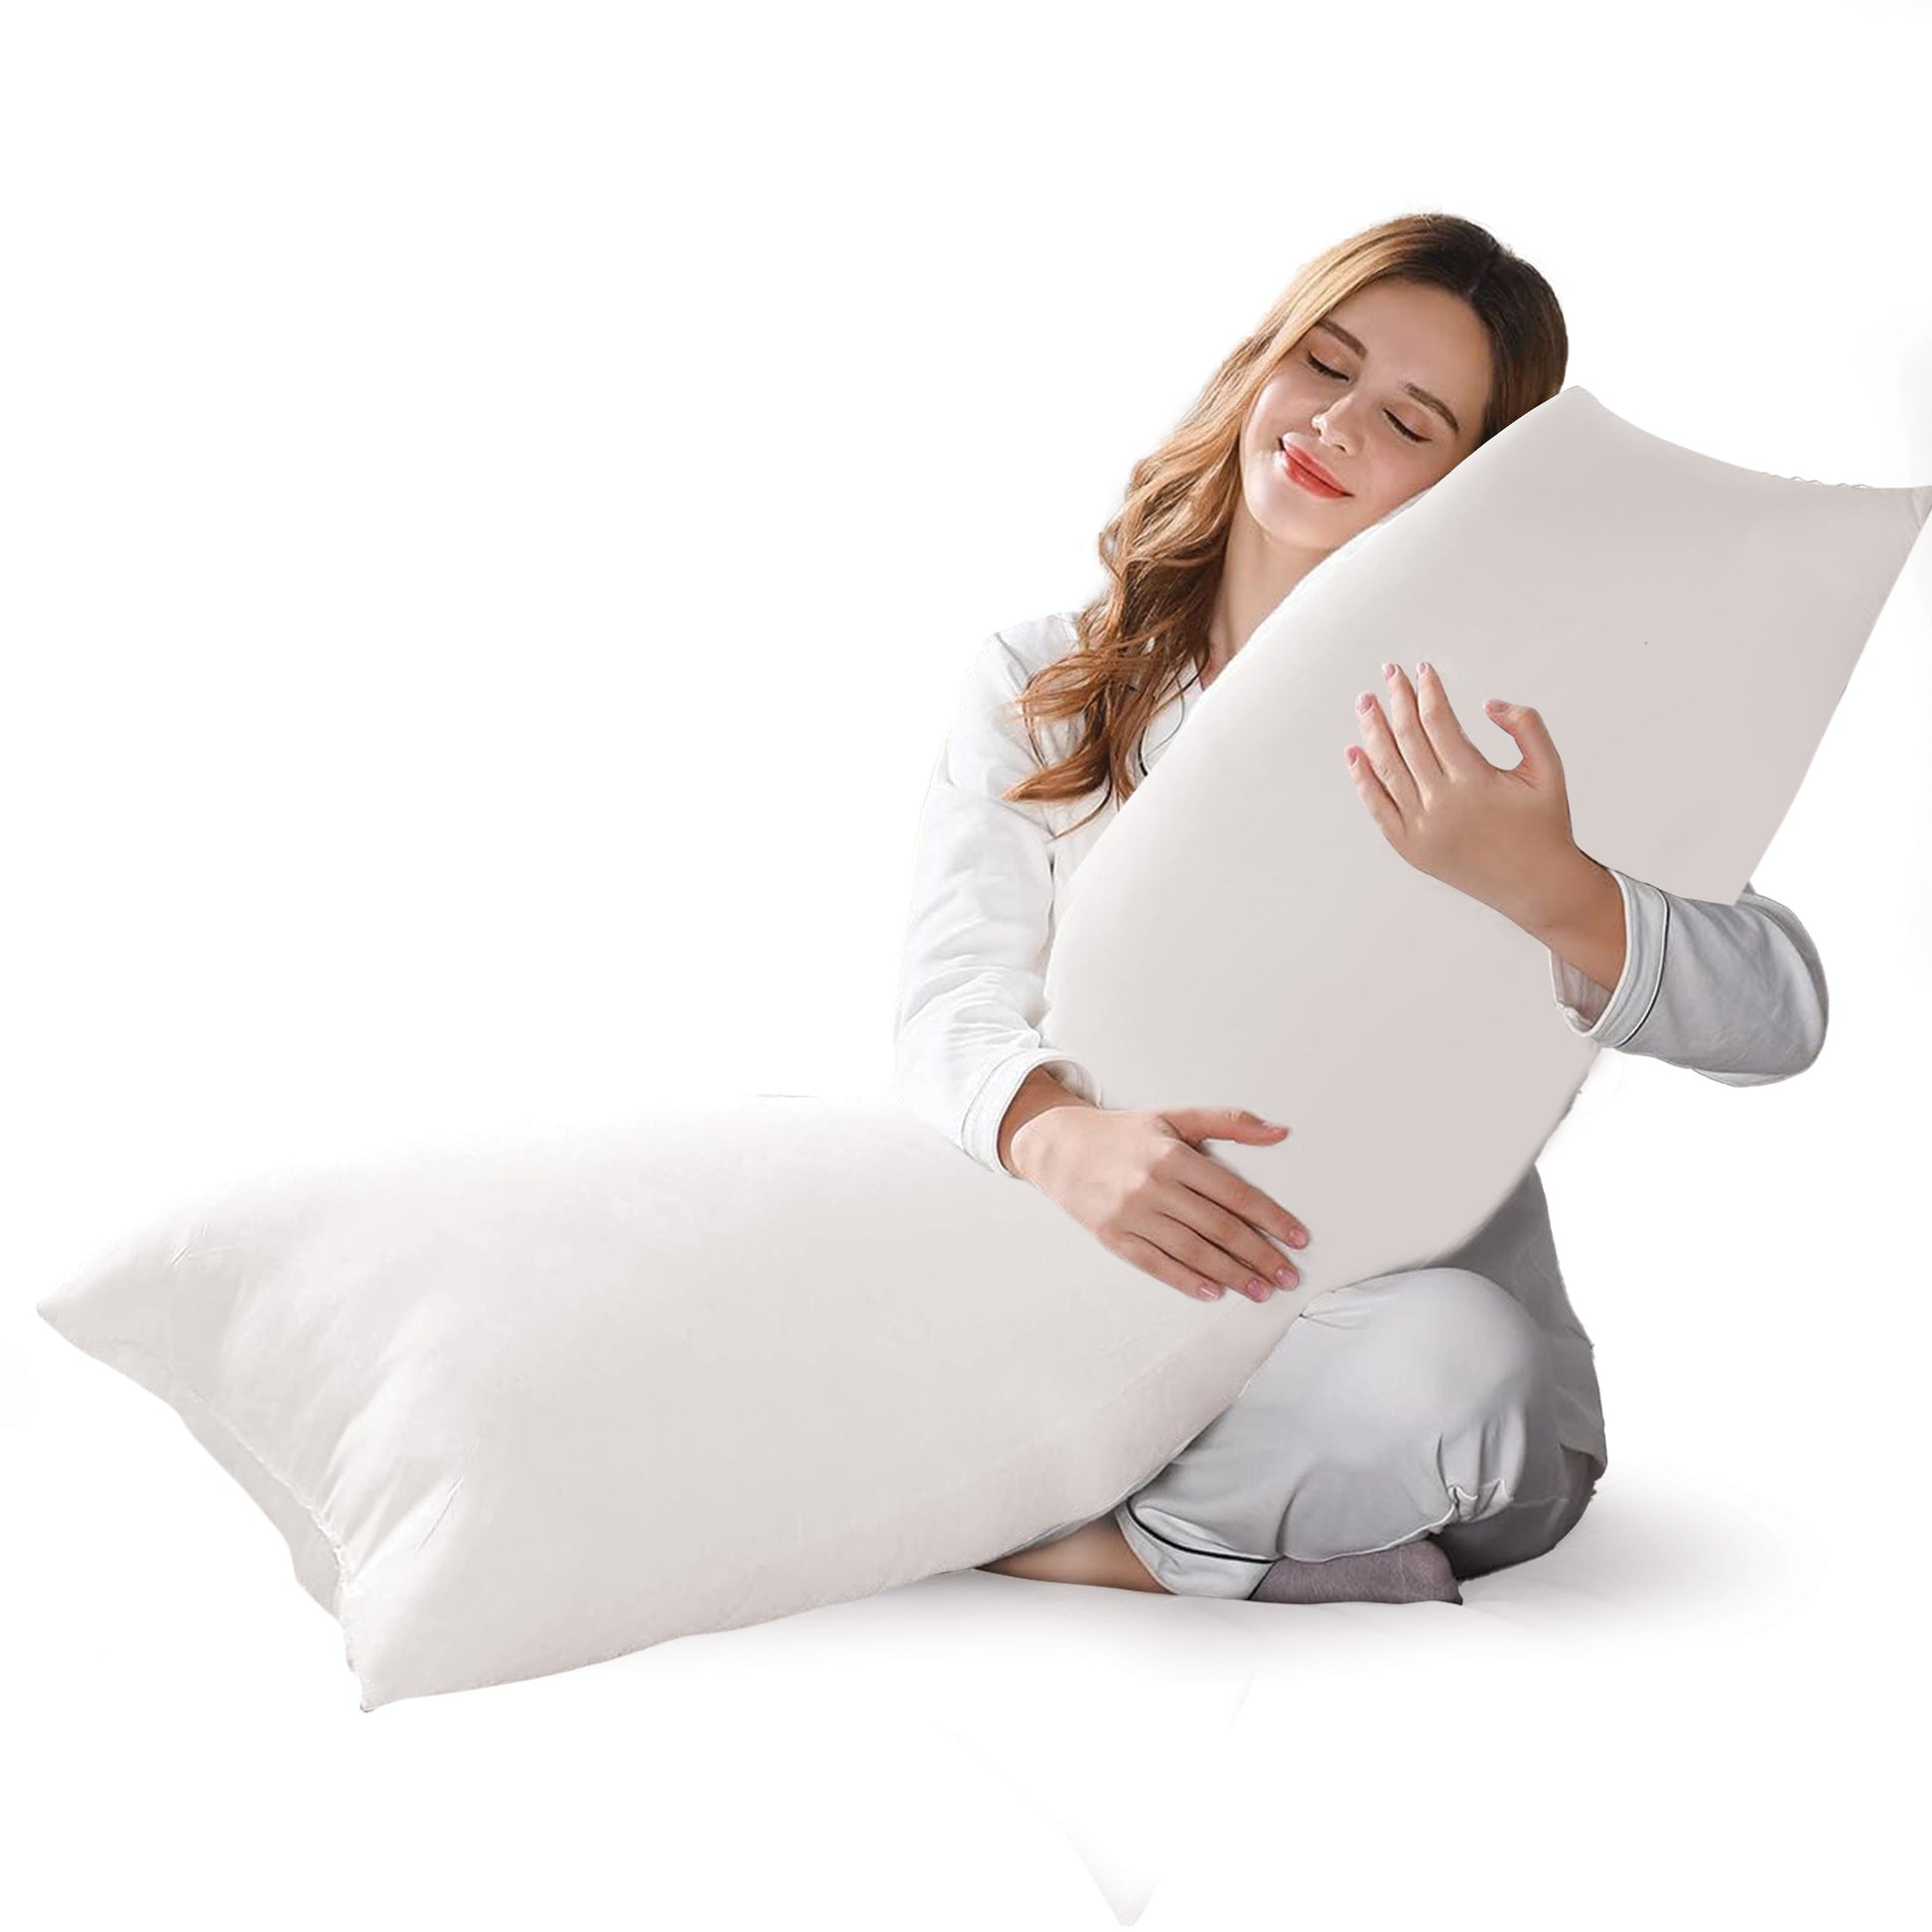 In her embrace, the woman holds a body pillow filled with a balanced blend of 50% down and 50% feathers, offering the perfect harmony of softness and support for a blissful night's sleep